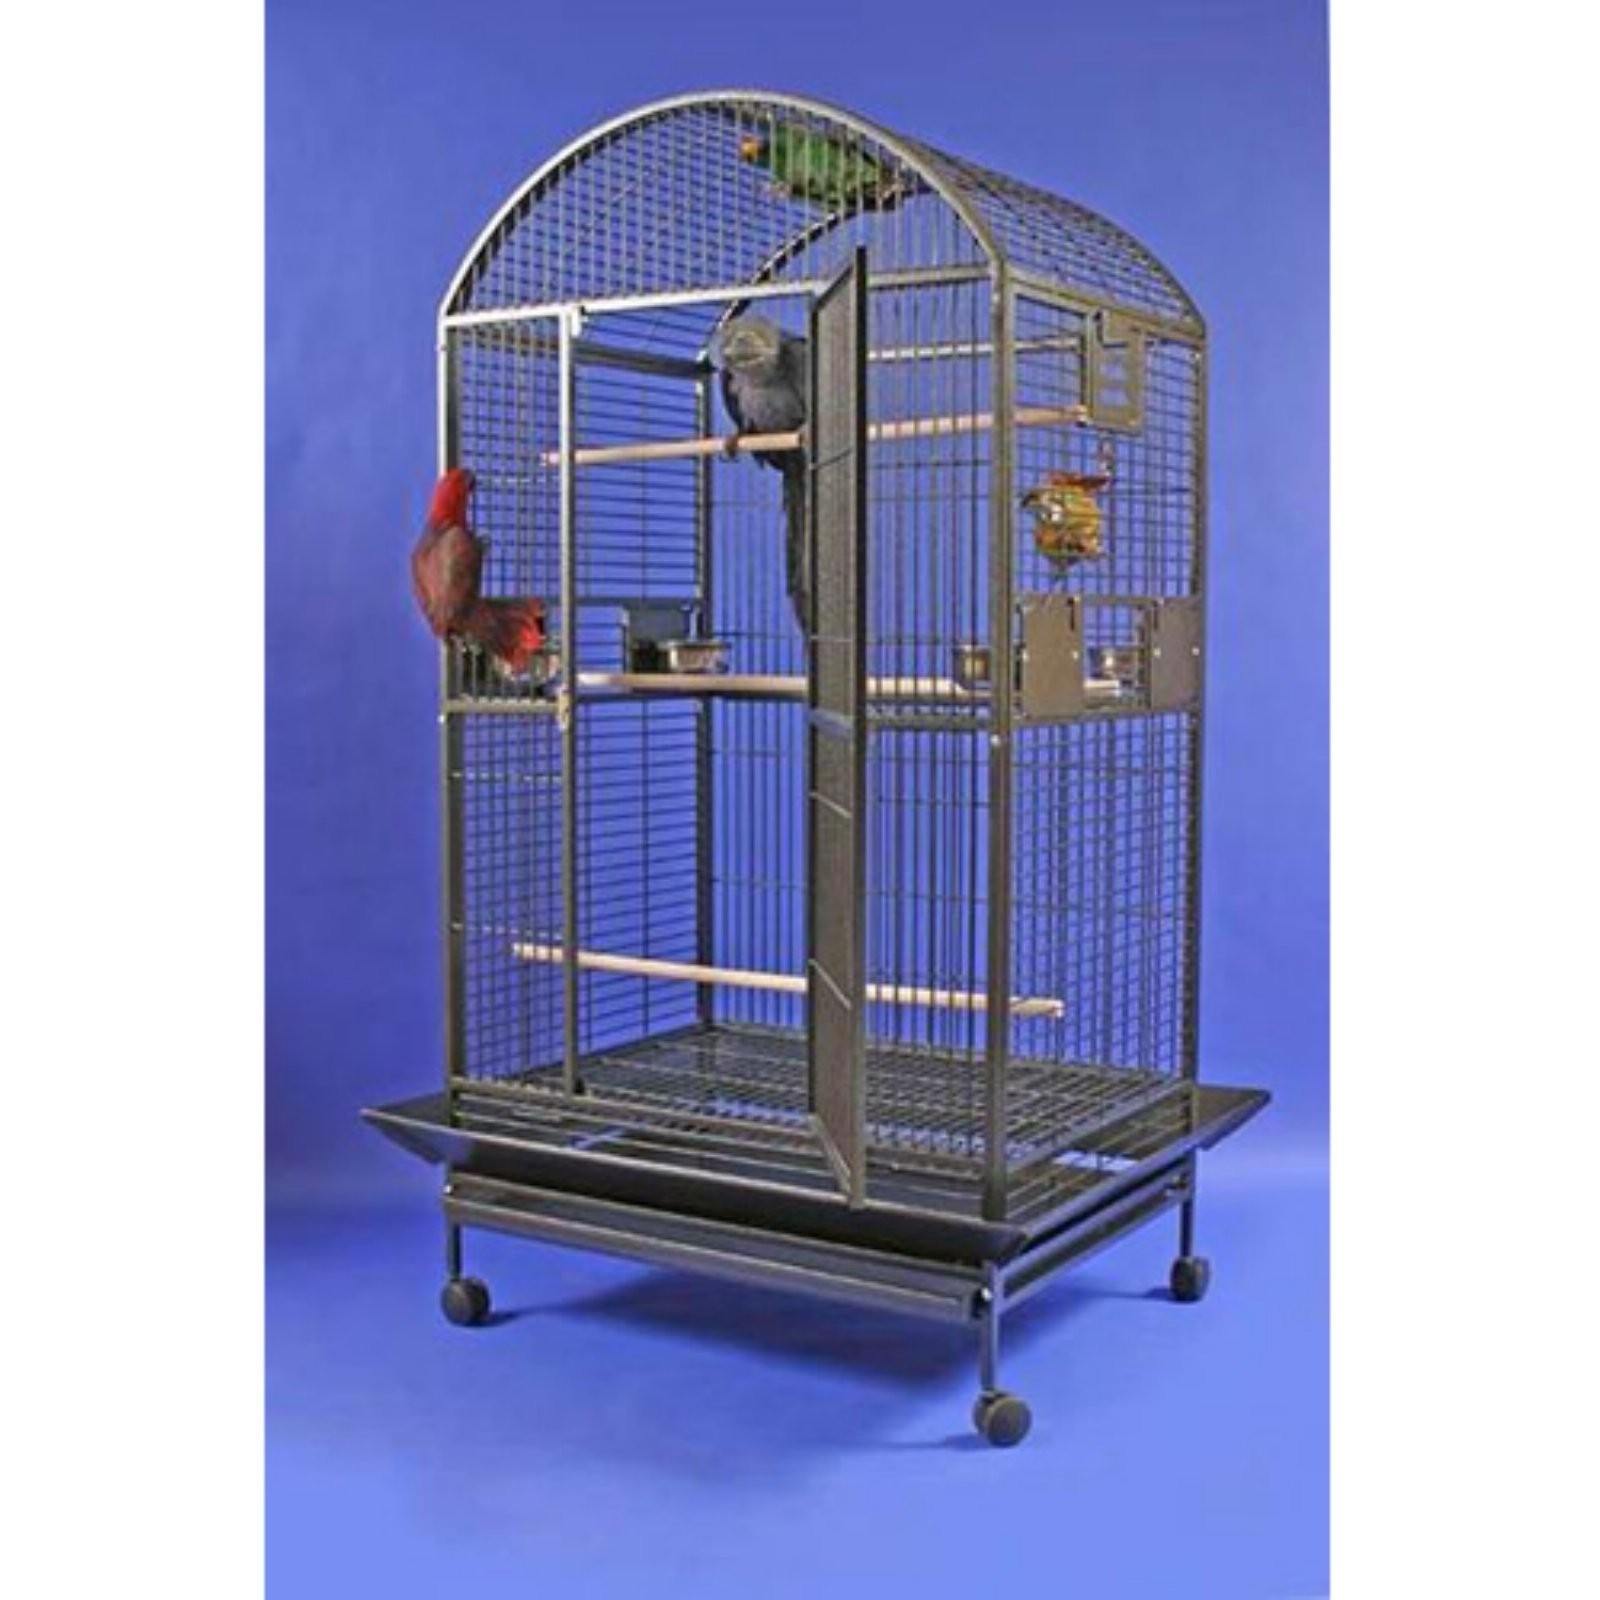 Mauna kea mansion bird cage two top styles 48 w